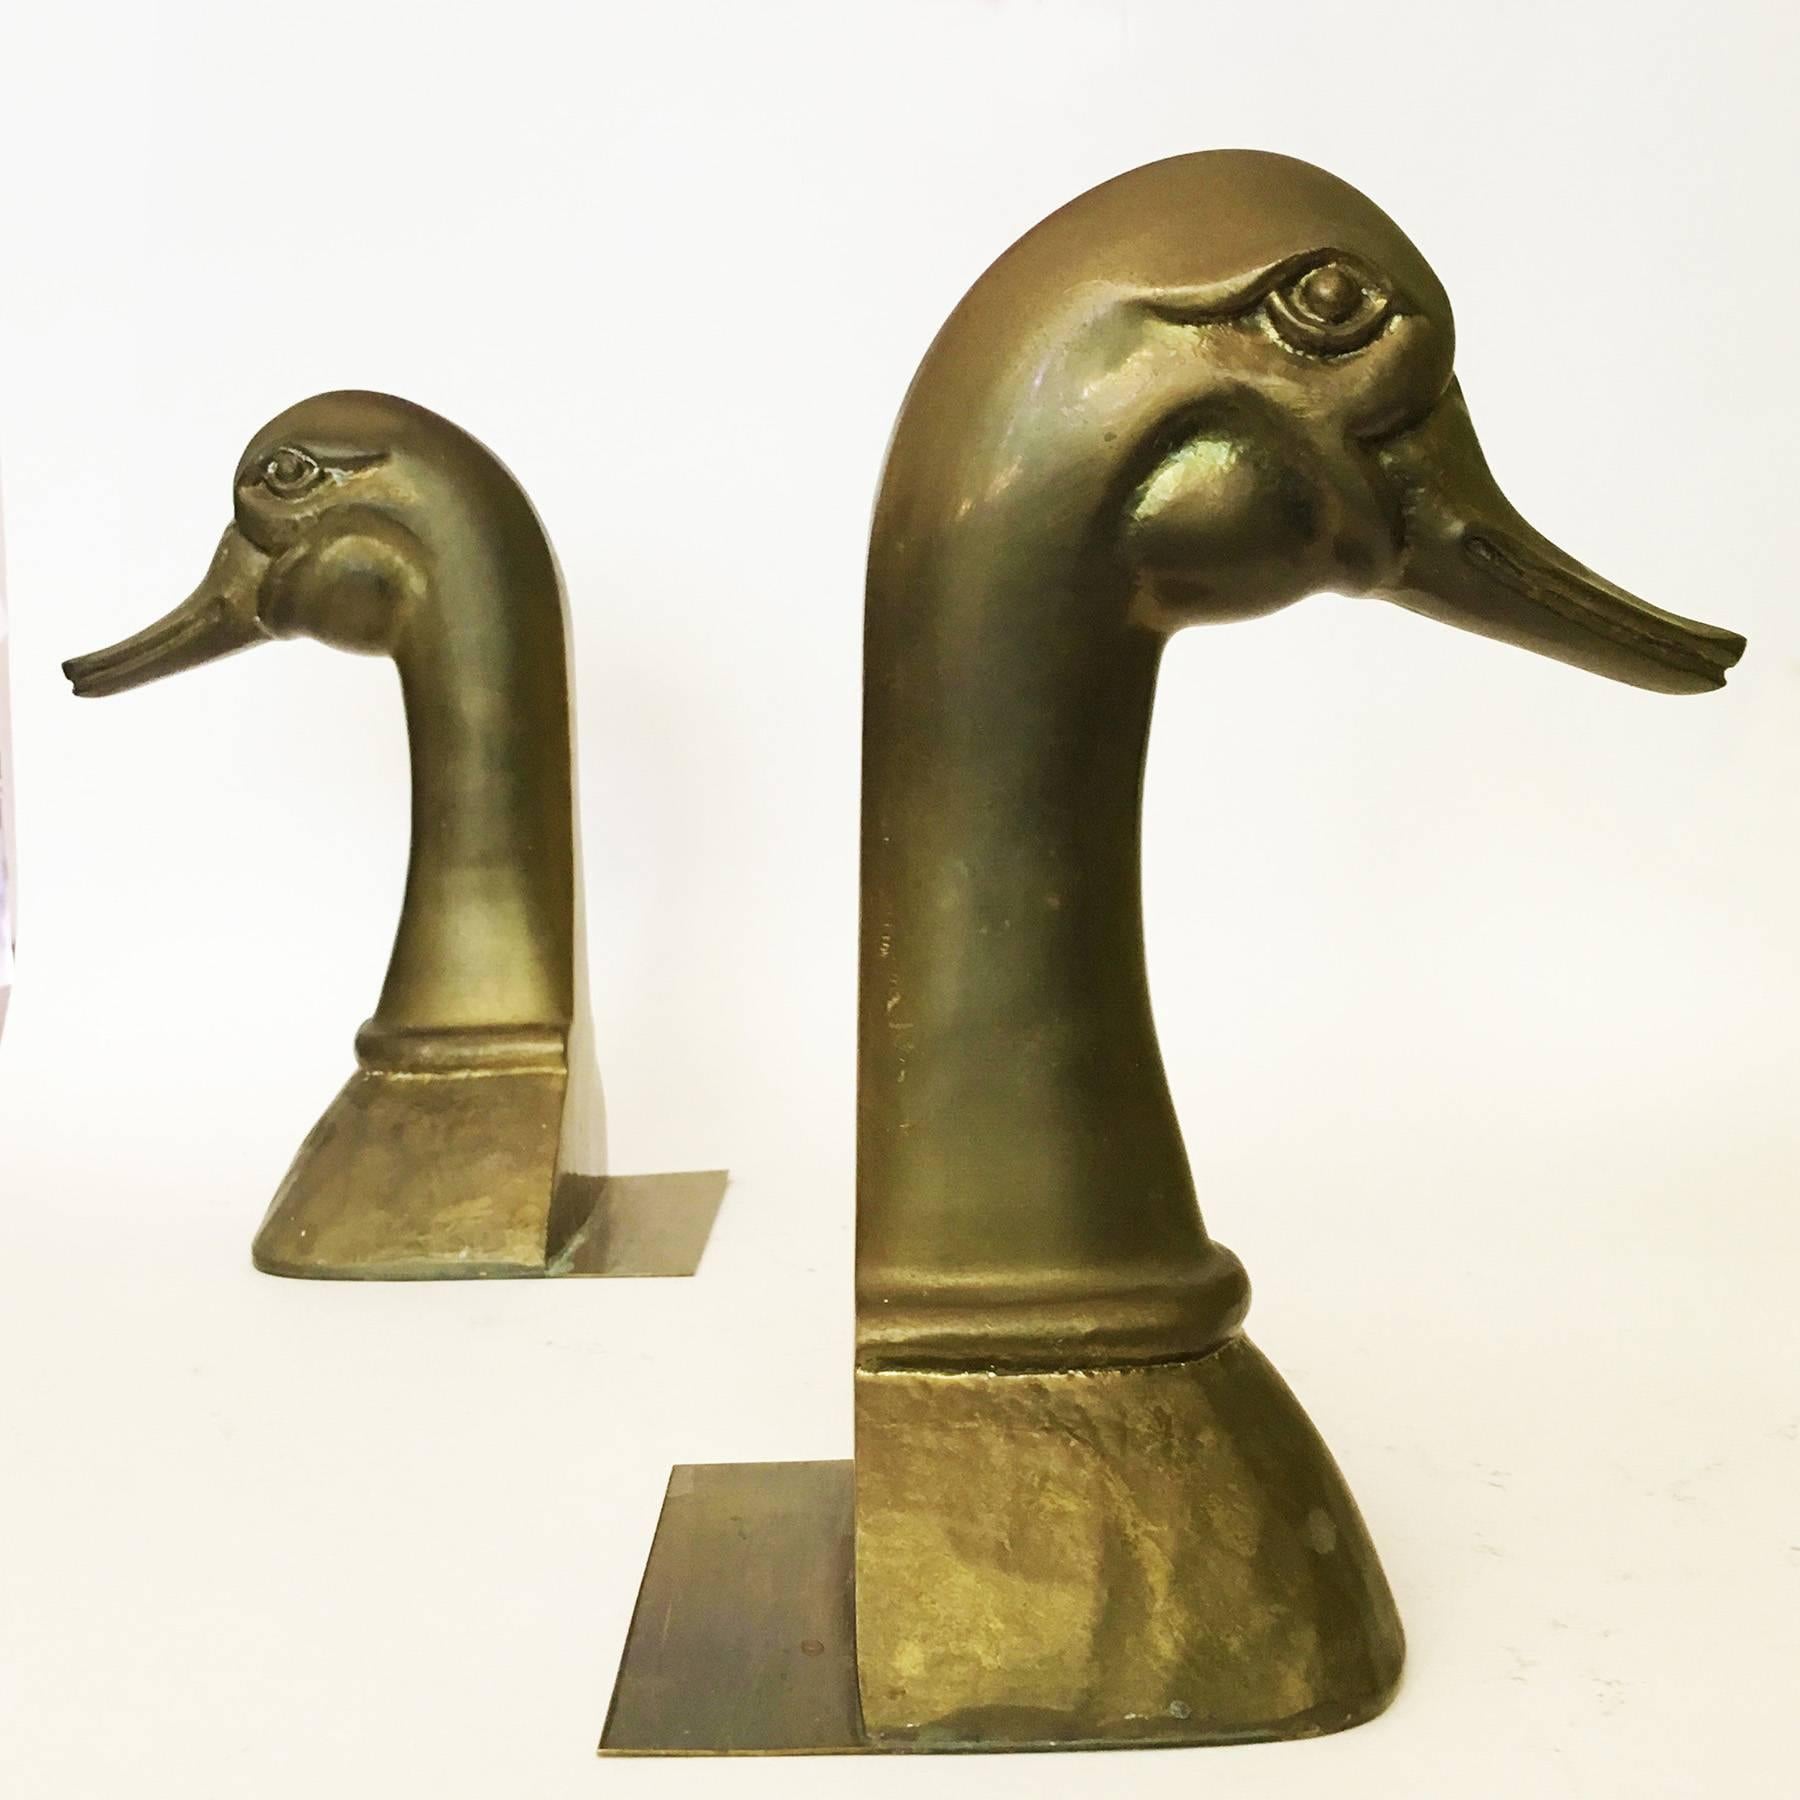 Two brass bookends from the 1970s. Both show a nice patina, but can easily polished, if you prefer.